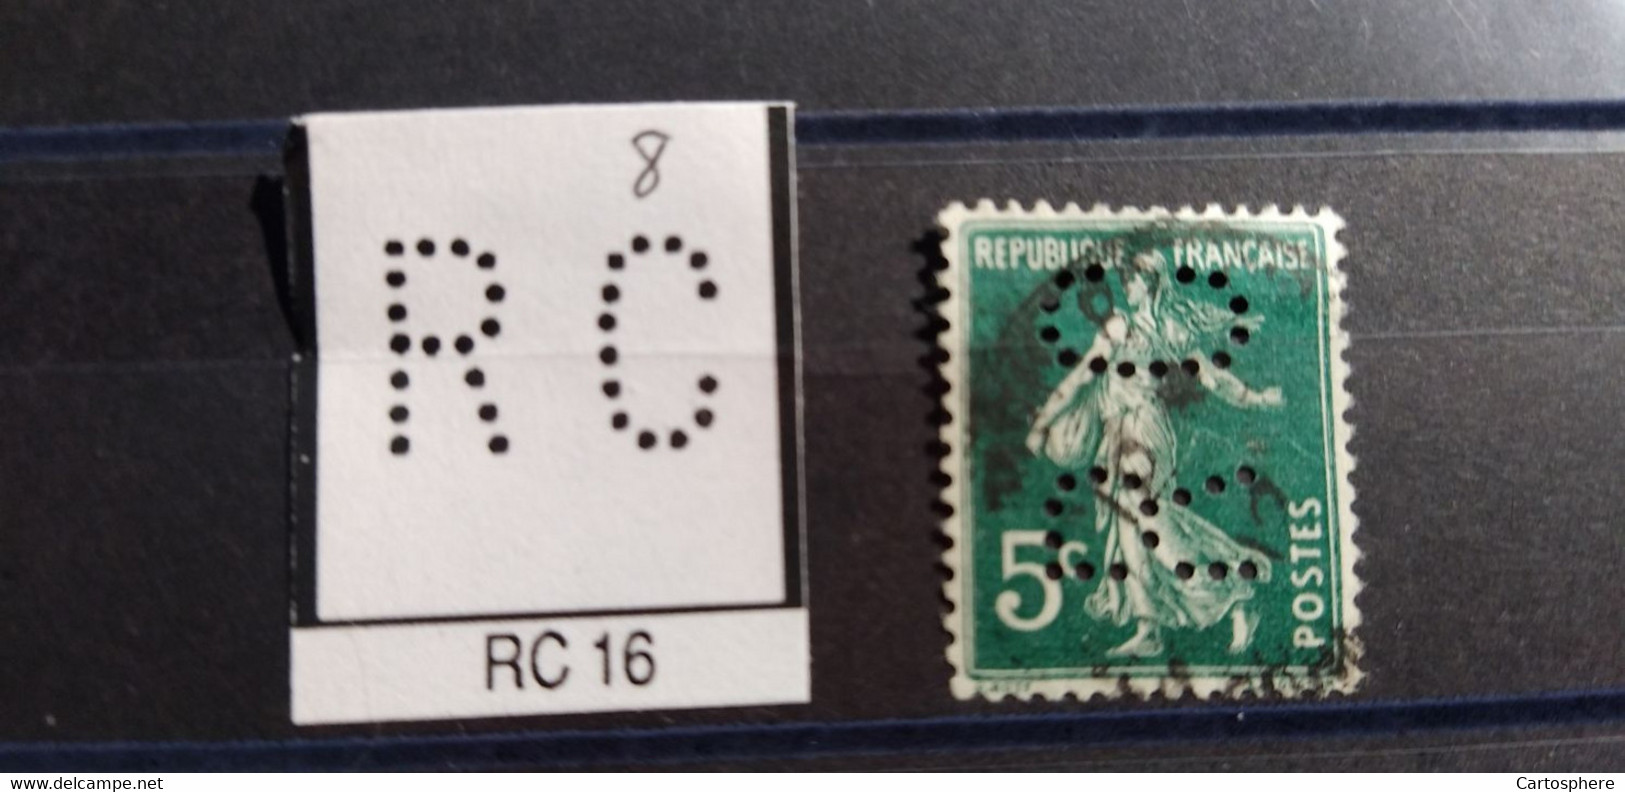 FRANCE TIMBRE RC 16 INDICE 8 SUR 137  PERFORE PERFORES PERFIN PERFINS PERFO PERFORATION PERFORIERT - Used Stamps